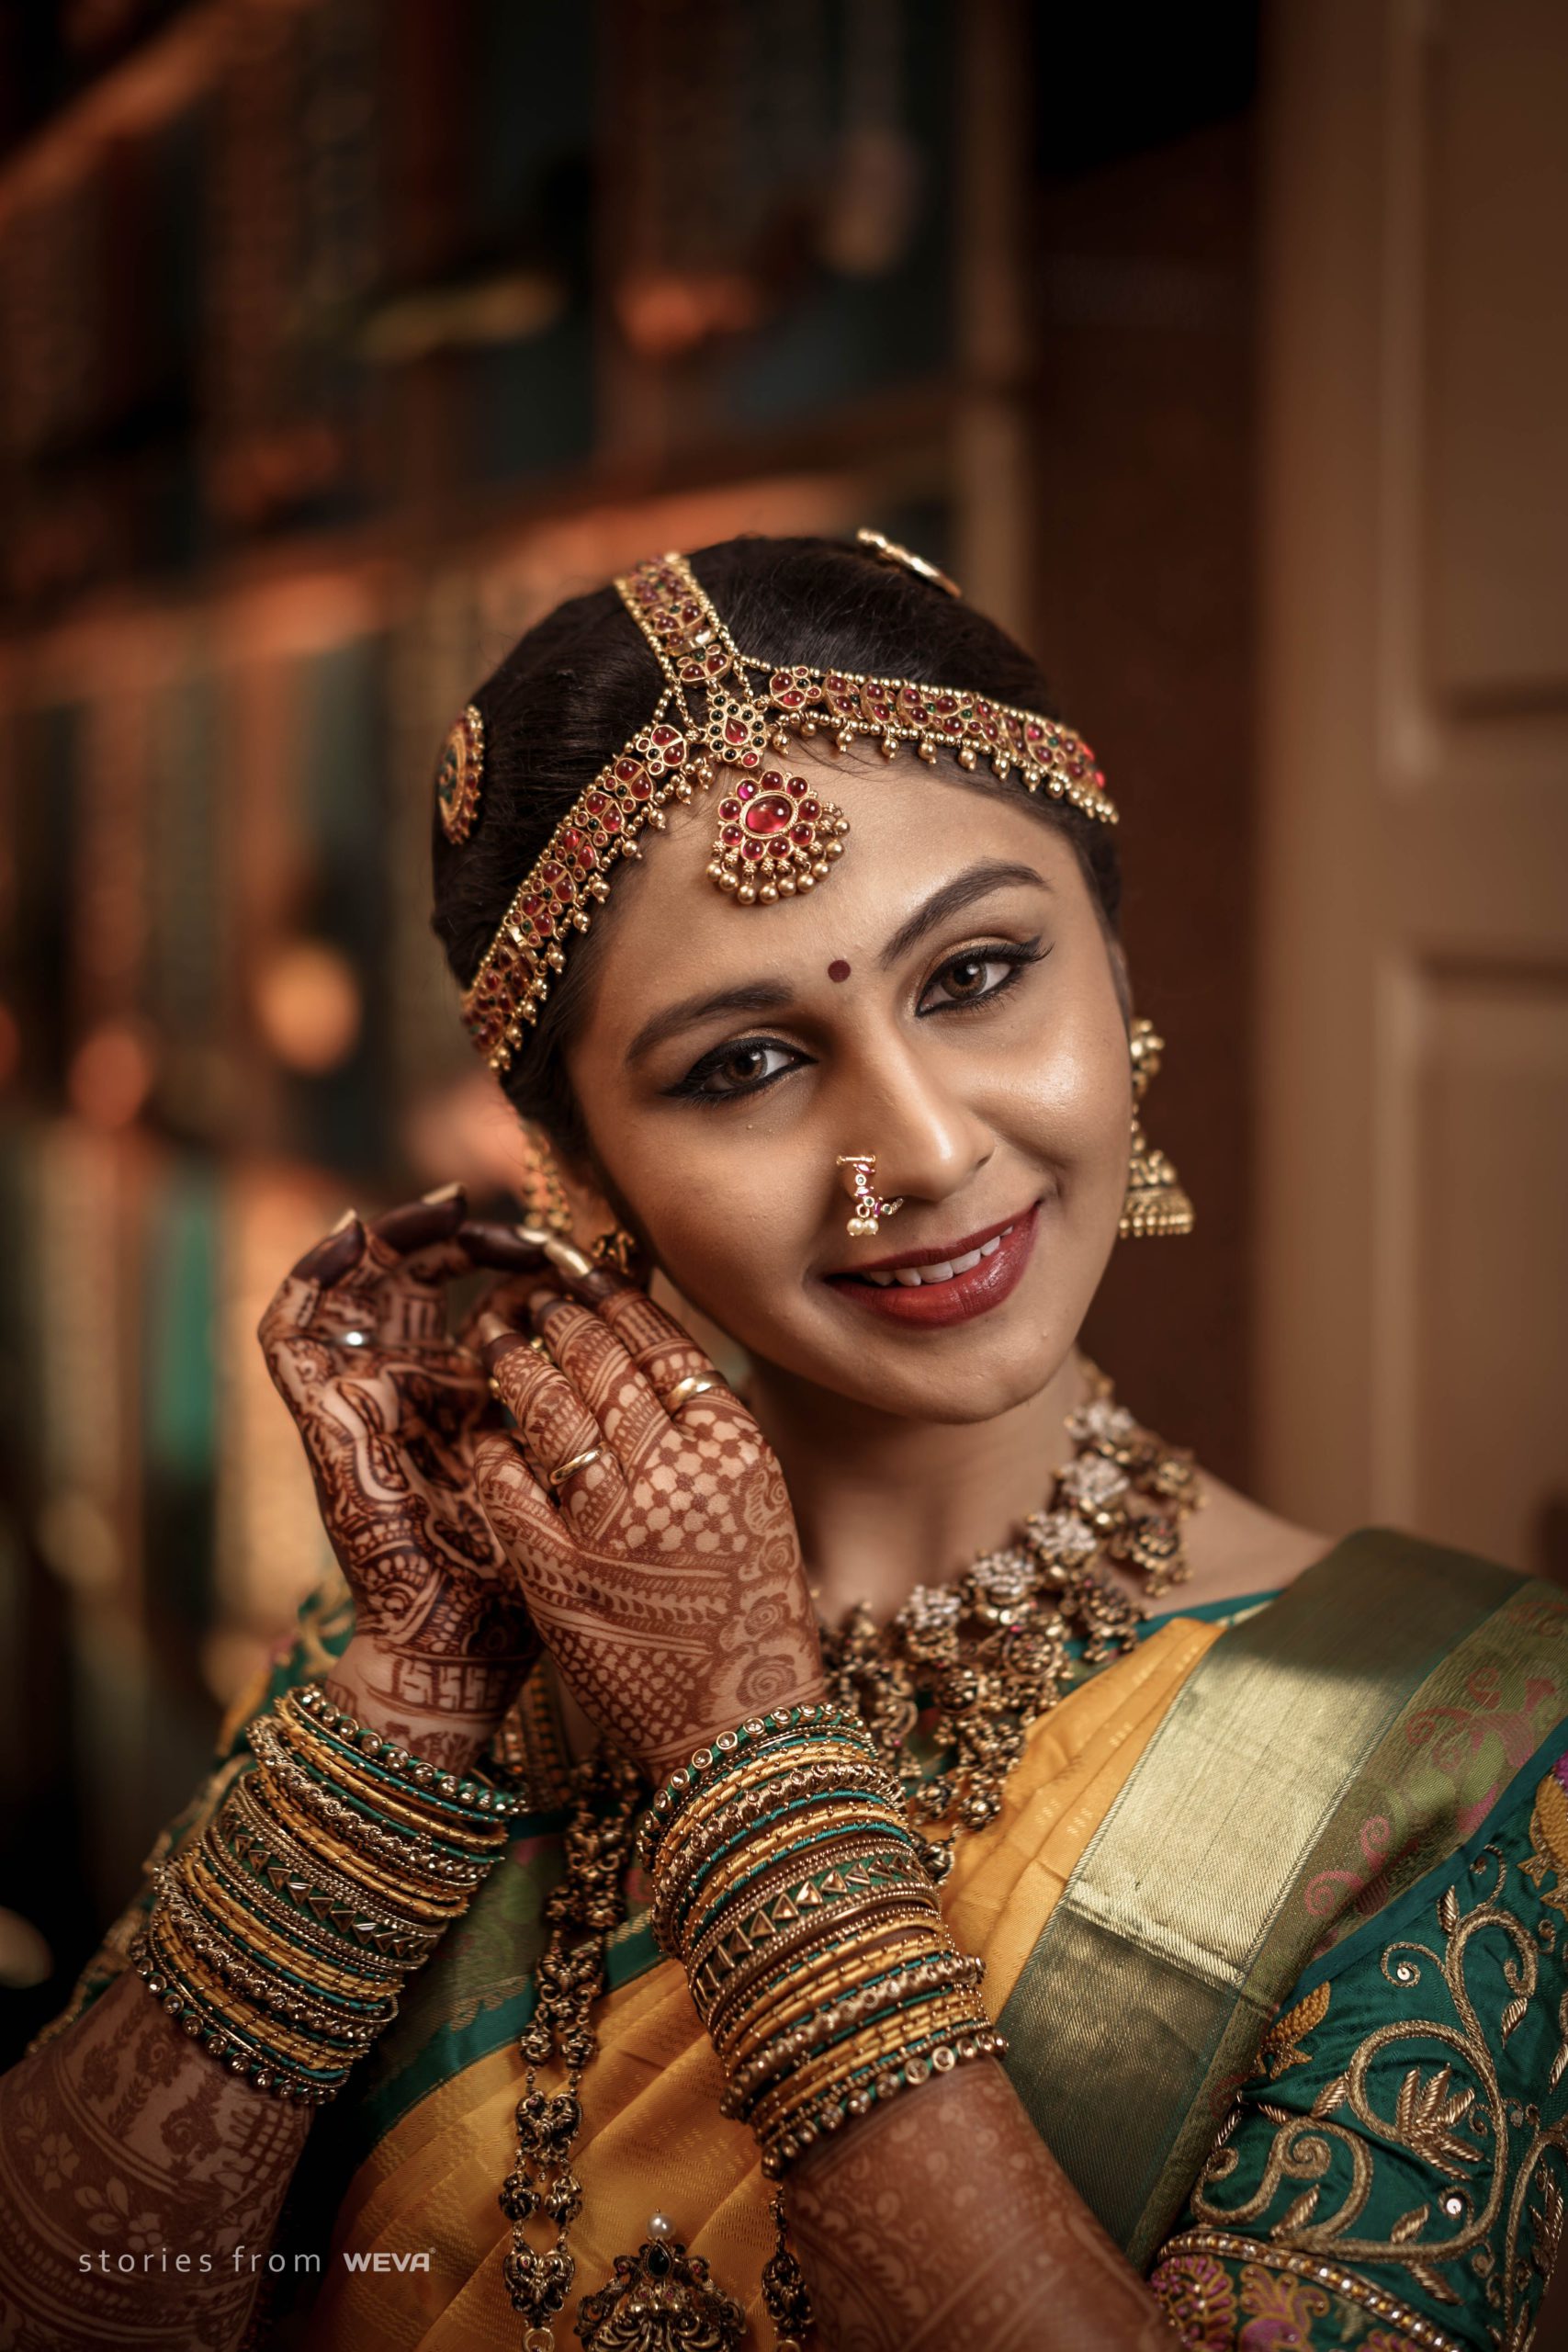 Easy Bridal Poses For Those Who Are Wearing A Saree On Their Wedding Day